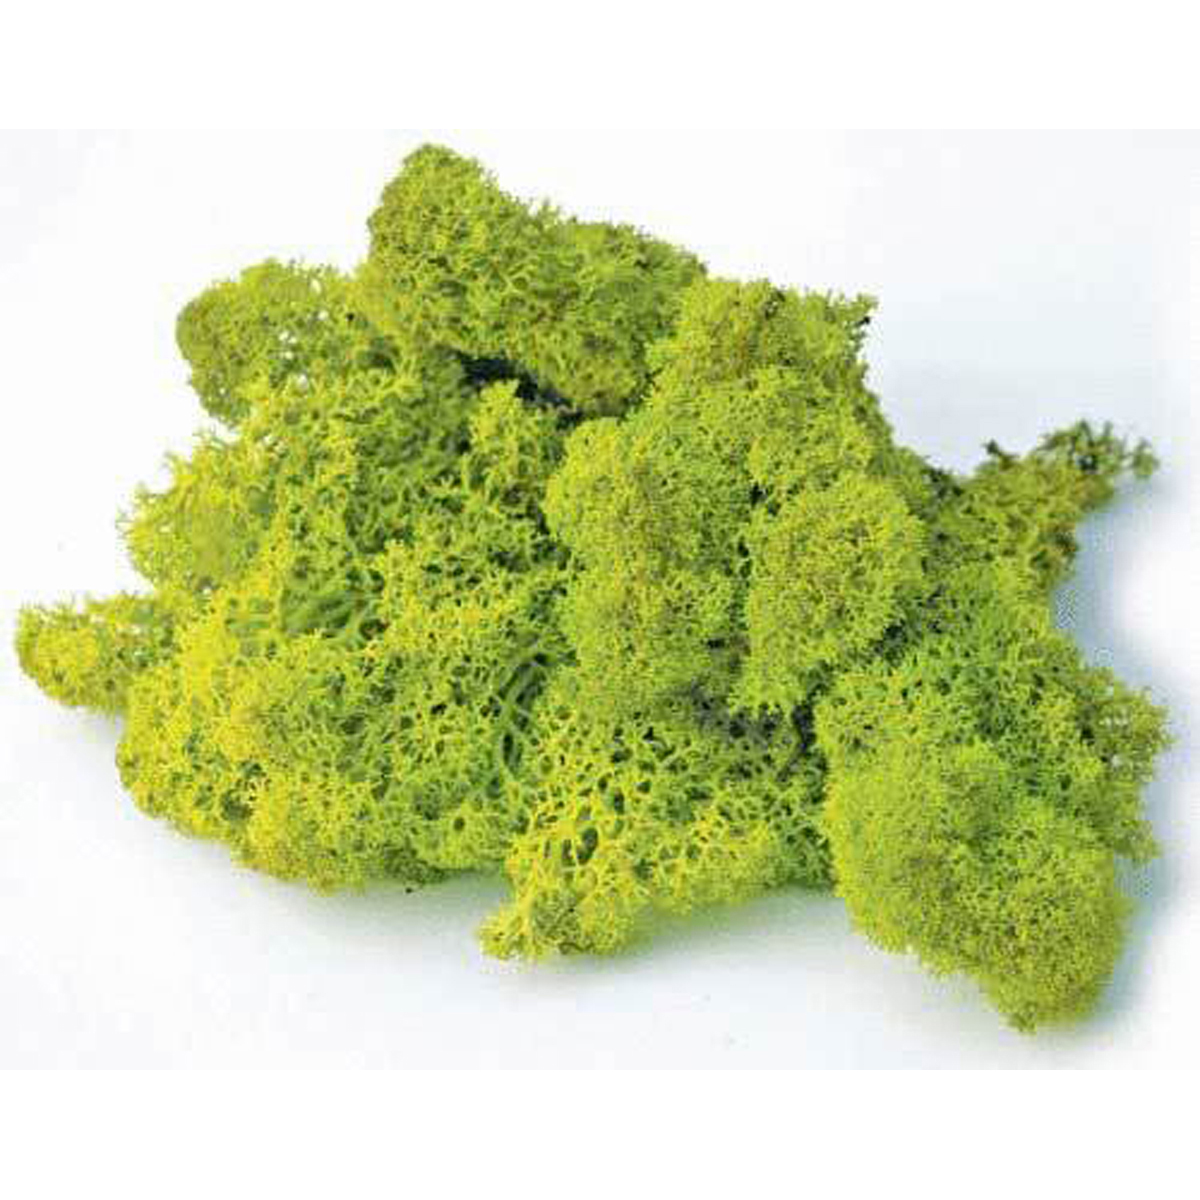 Image Thumbnail for Reindeer Moss Preserved Chartreuse 8oz Bag